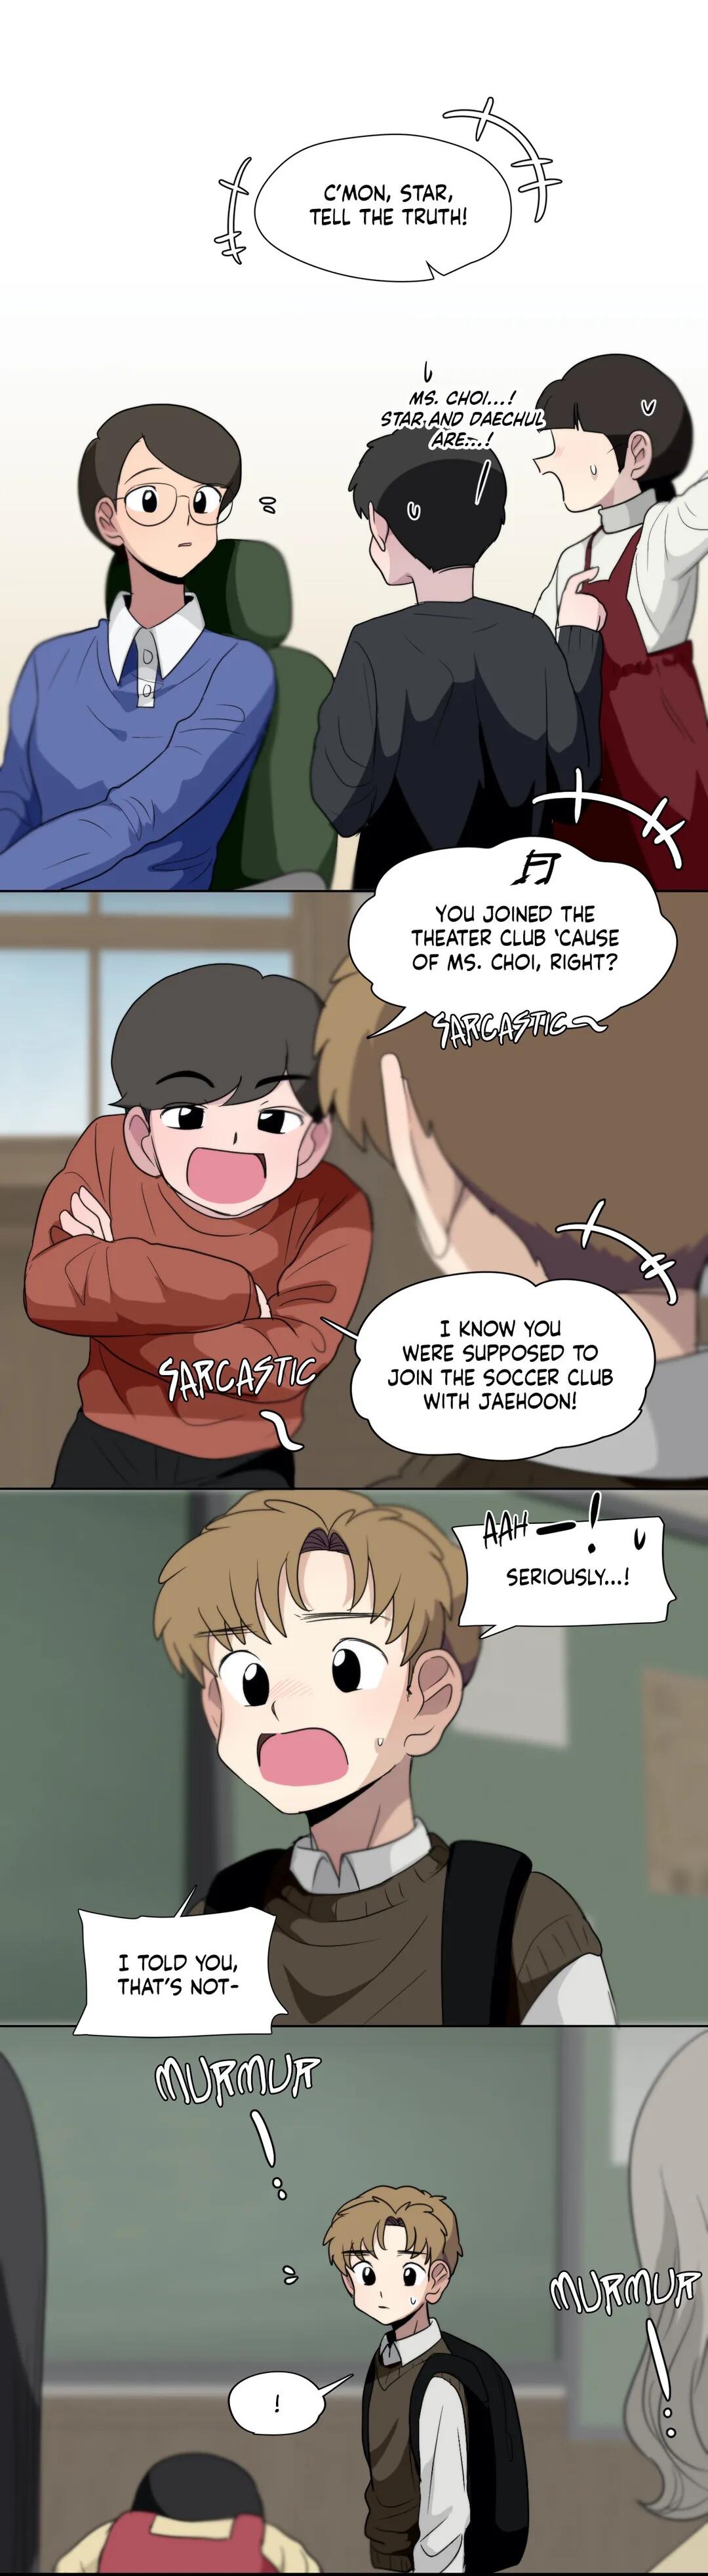 Star x Fanboy - chapter 146 - #1